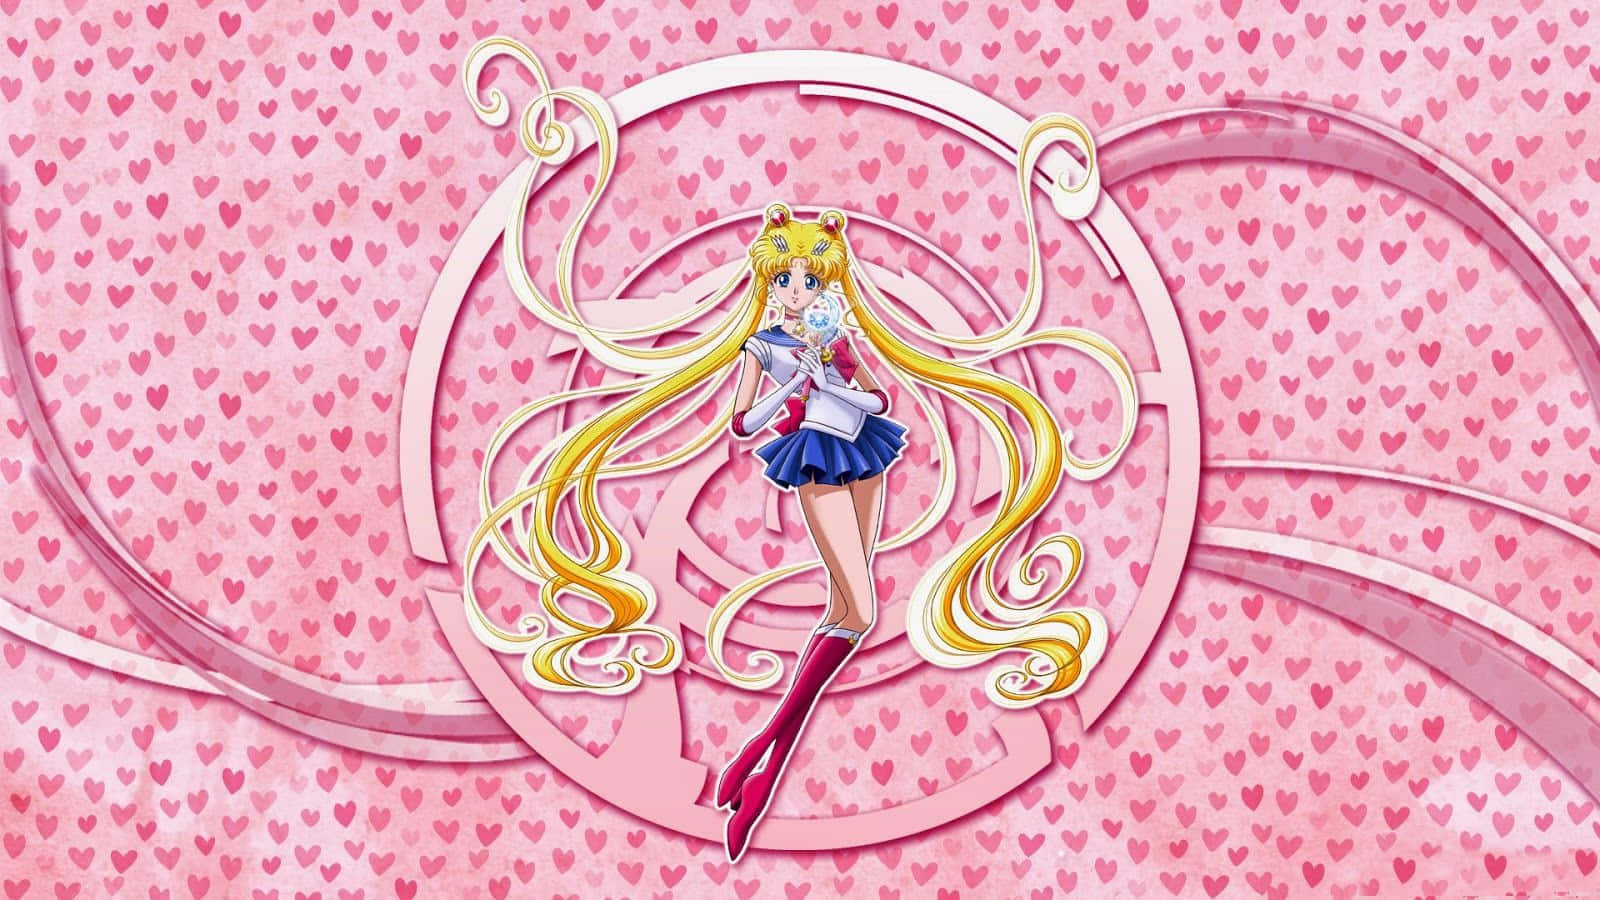 The heroine of the iconic Sailor Moon anime gets an aesthetic upgrade Wallpaper